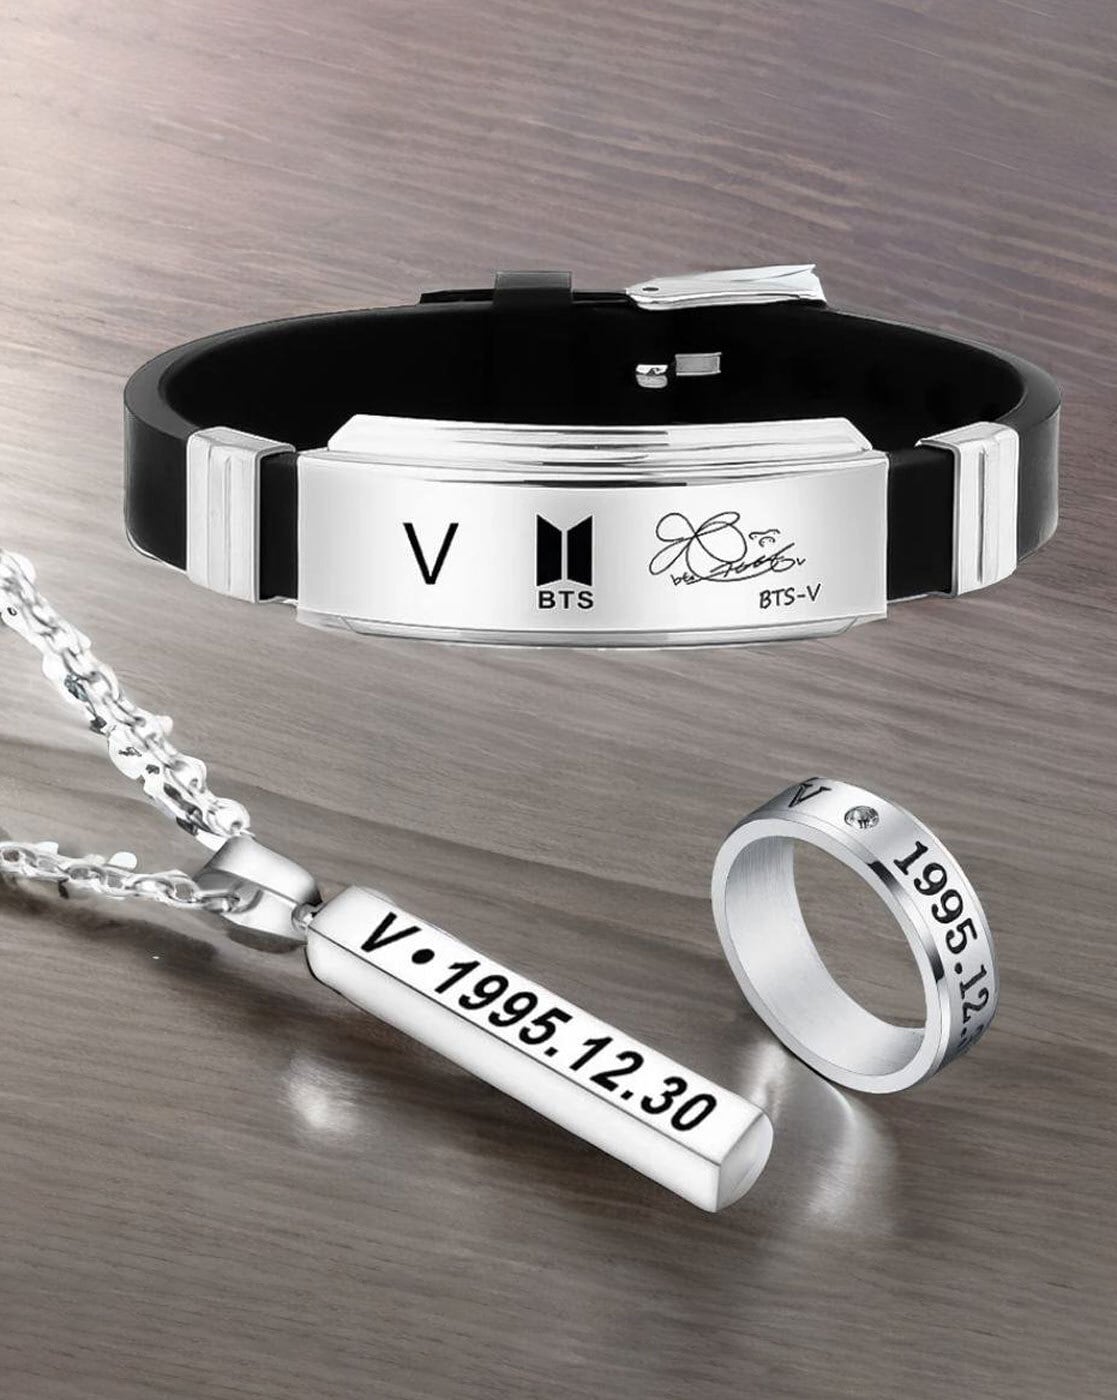 Buy Vientiq BTS V Signature Printing Silicon Wristband Bracelet for Boys &  Girls (Pack of 1) at Amazon.in